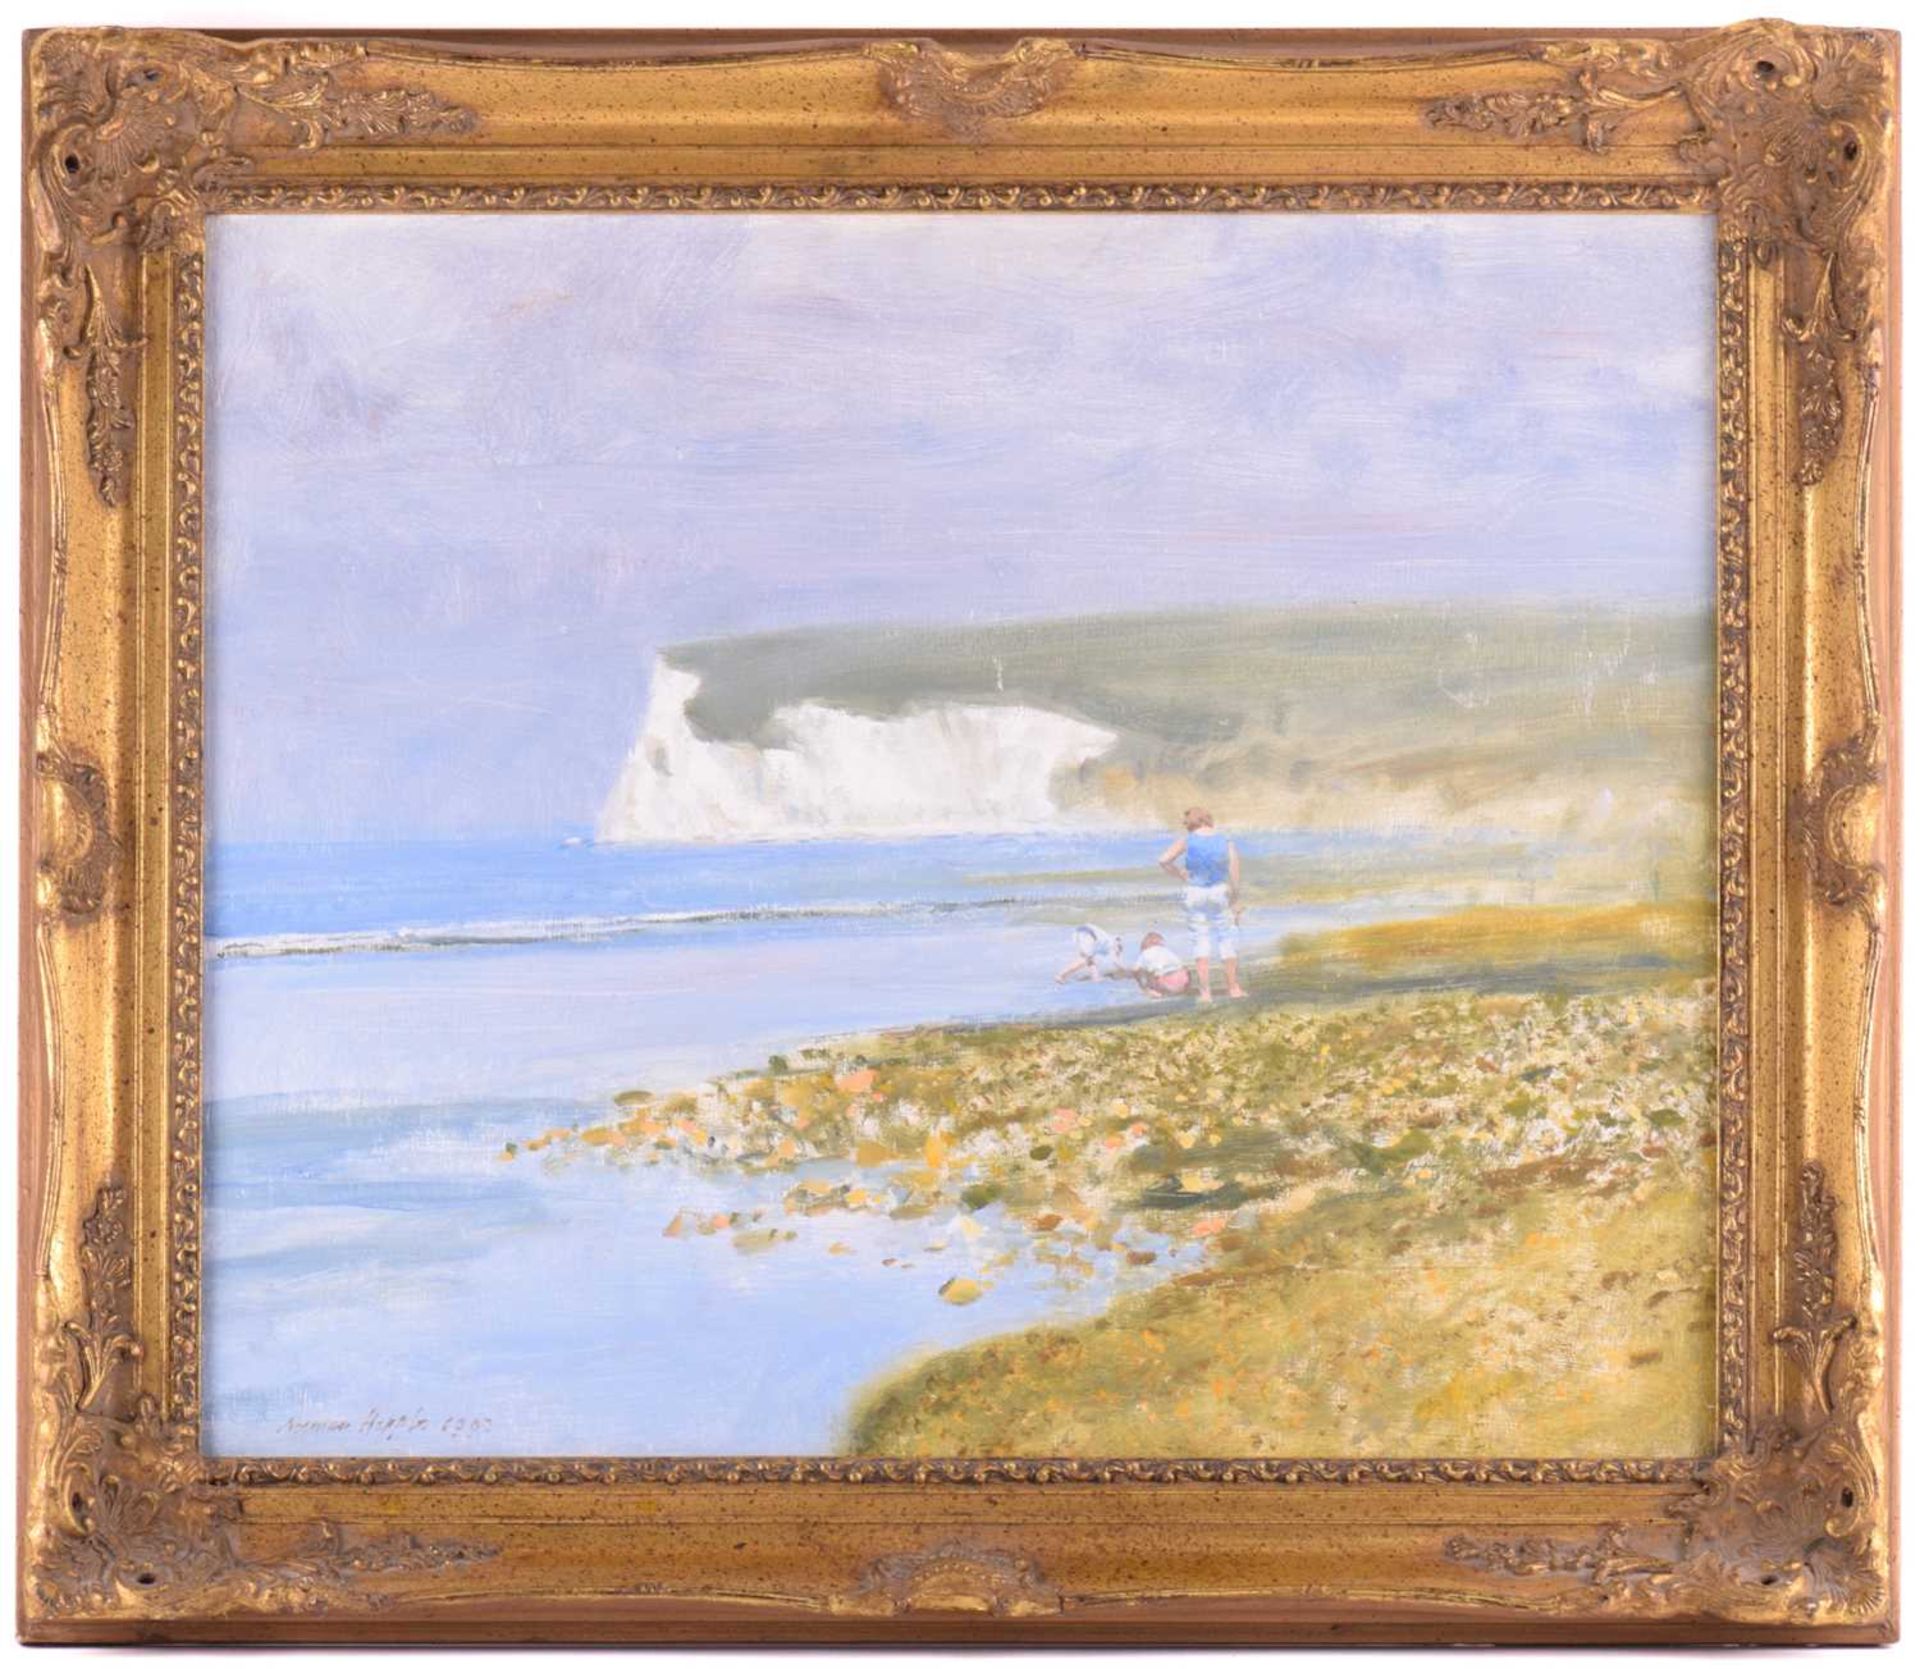 Norman R. Hepple (1908 - 1994), 'Beachtime Fun', signed and dated 1993, oil on board, 50 x 60 cm, fr - Image 3 of 7